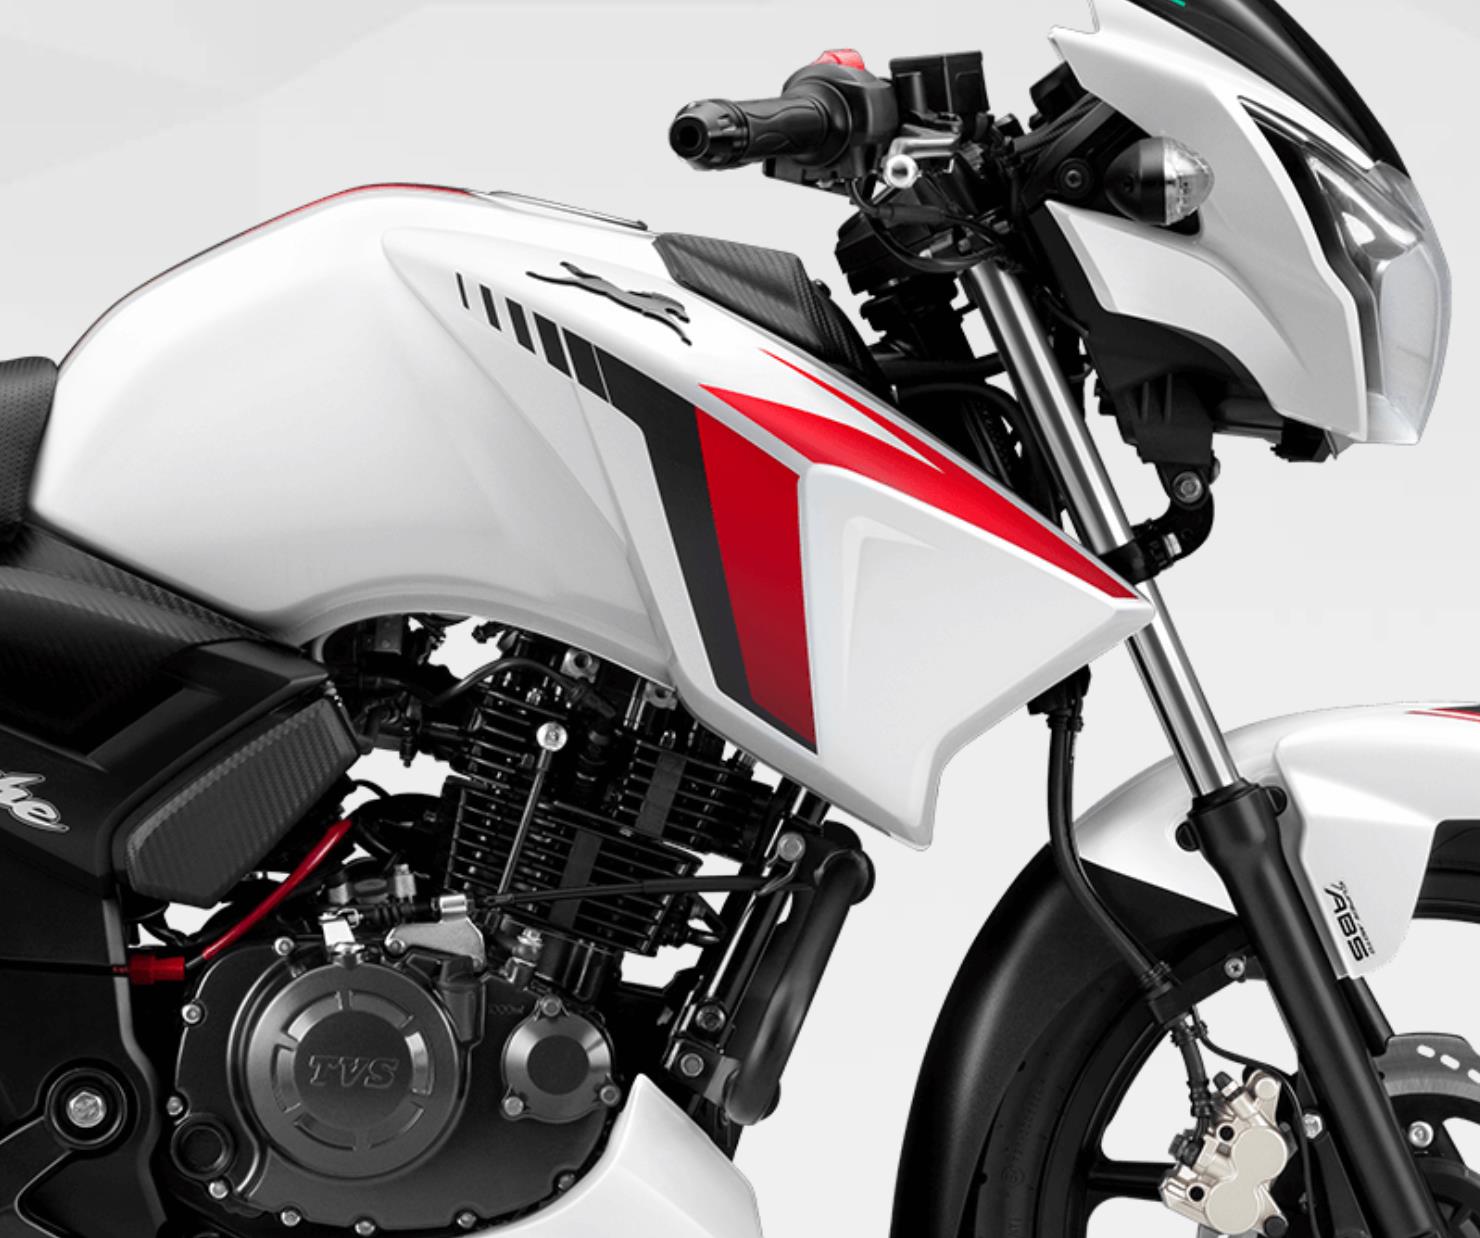 Tvs Apache Rtr 160 2v Disc Price Top Speed Mileage In India